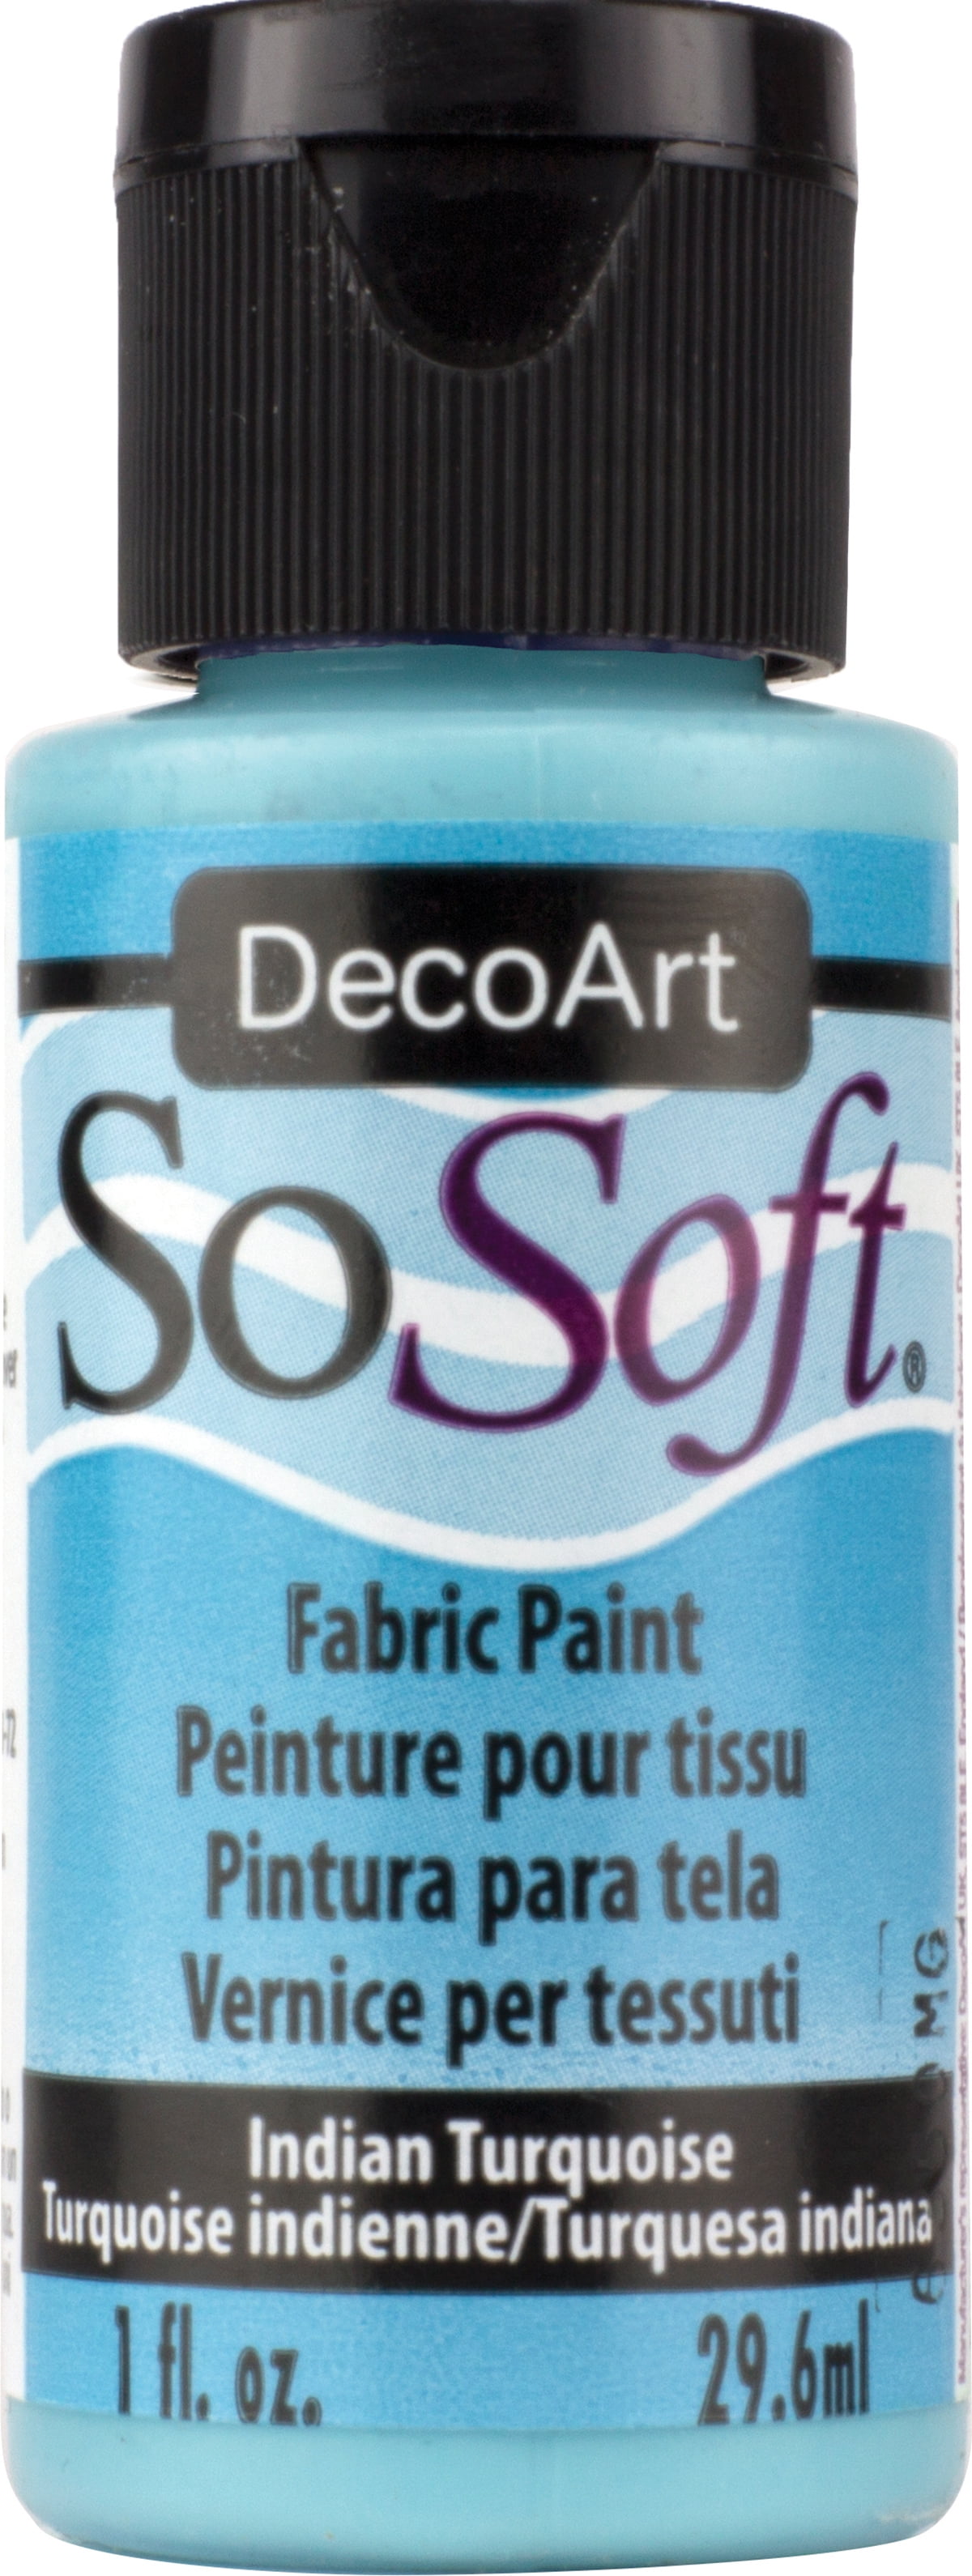 Content Crafts Fabric Paint